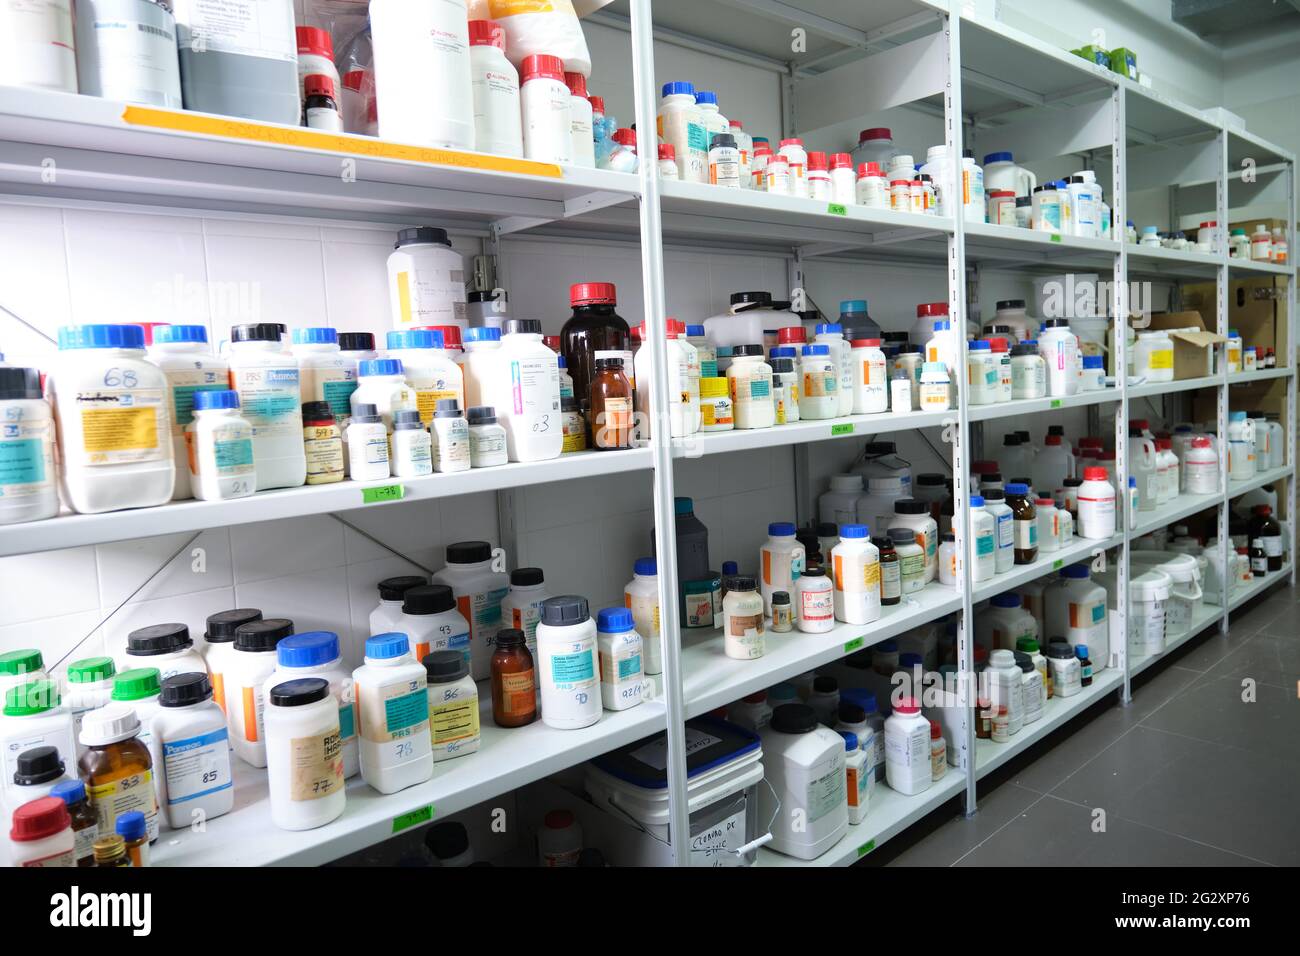 Madrid, Spain. June 1, 2021: Chemical storage room in a research laboratory. Stock Photo